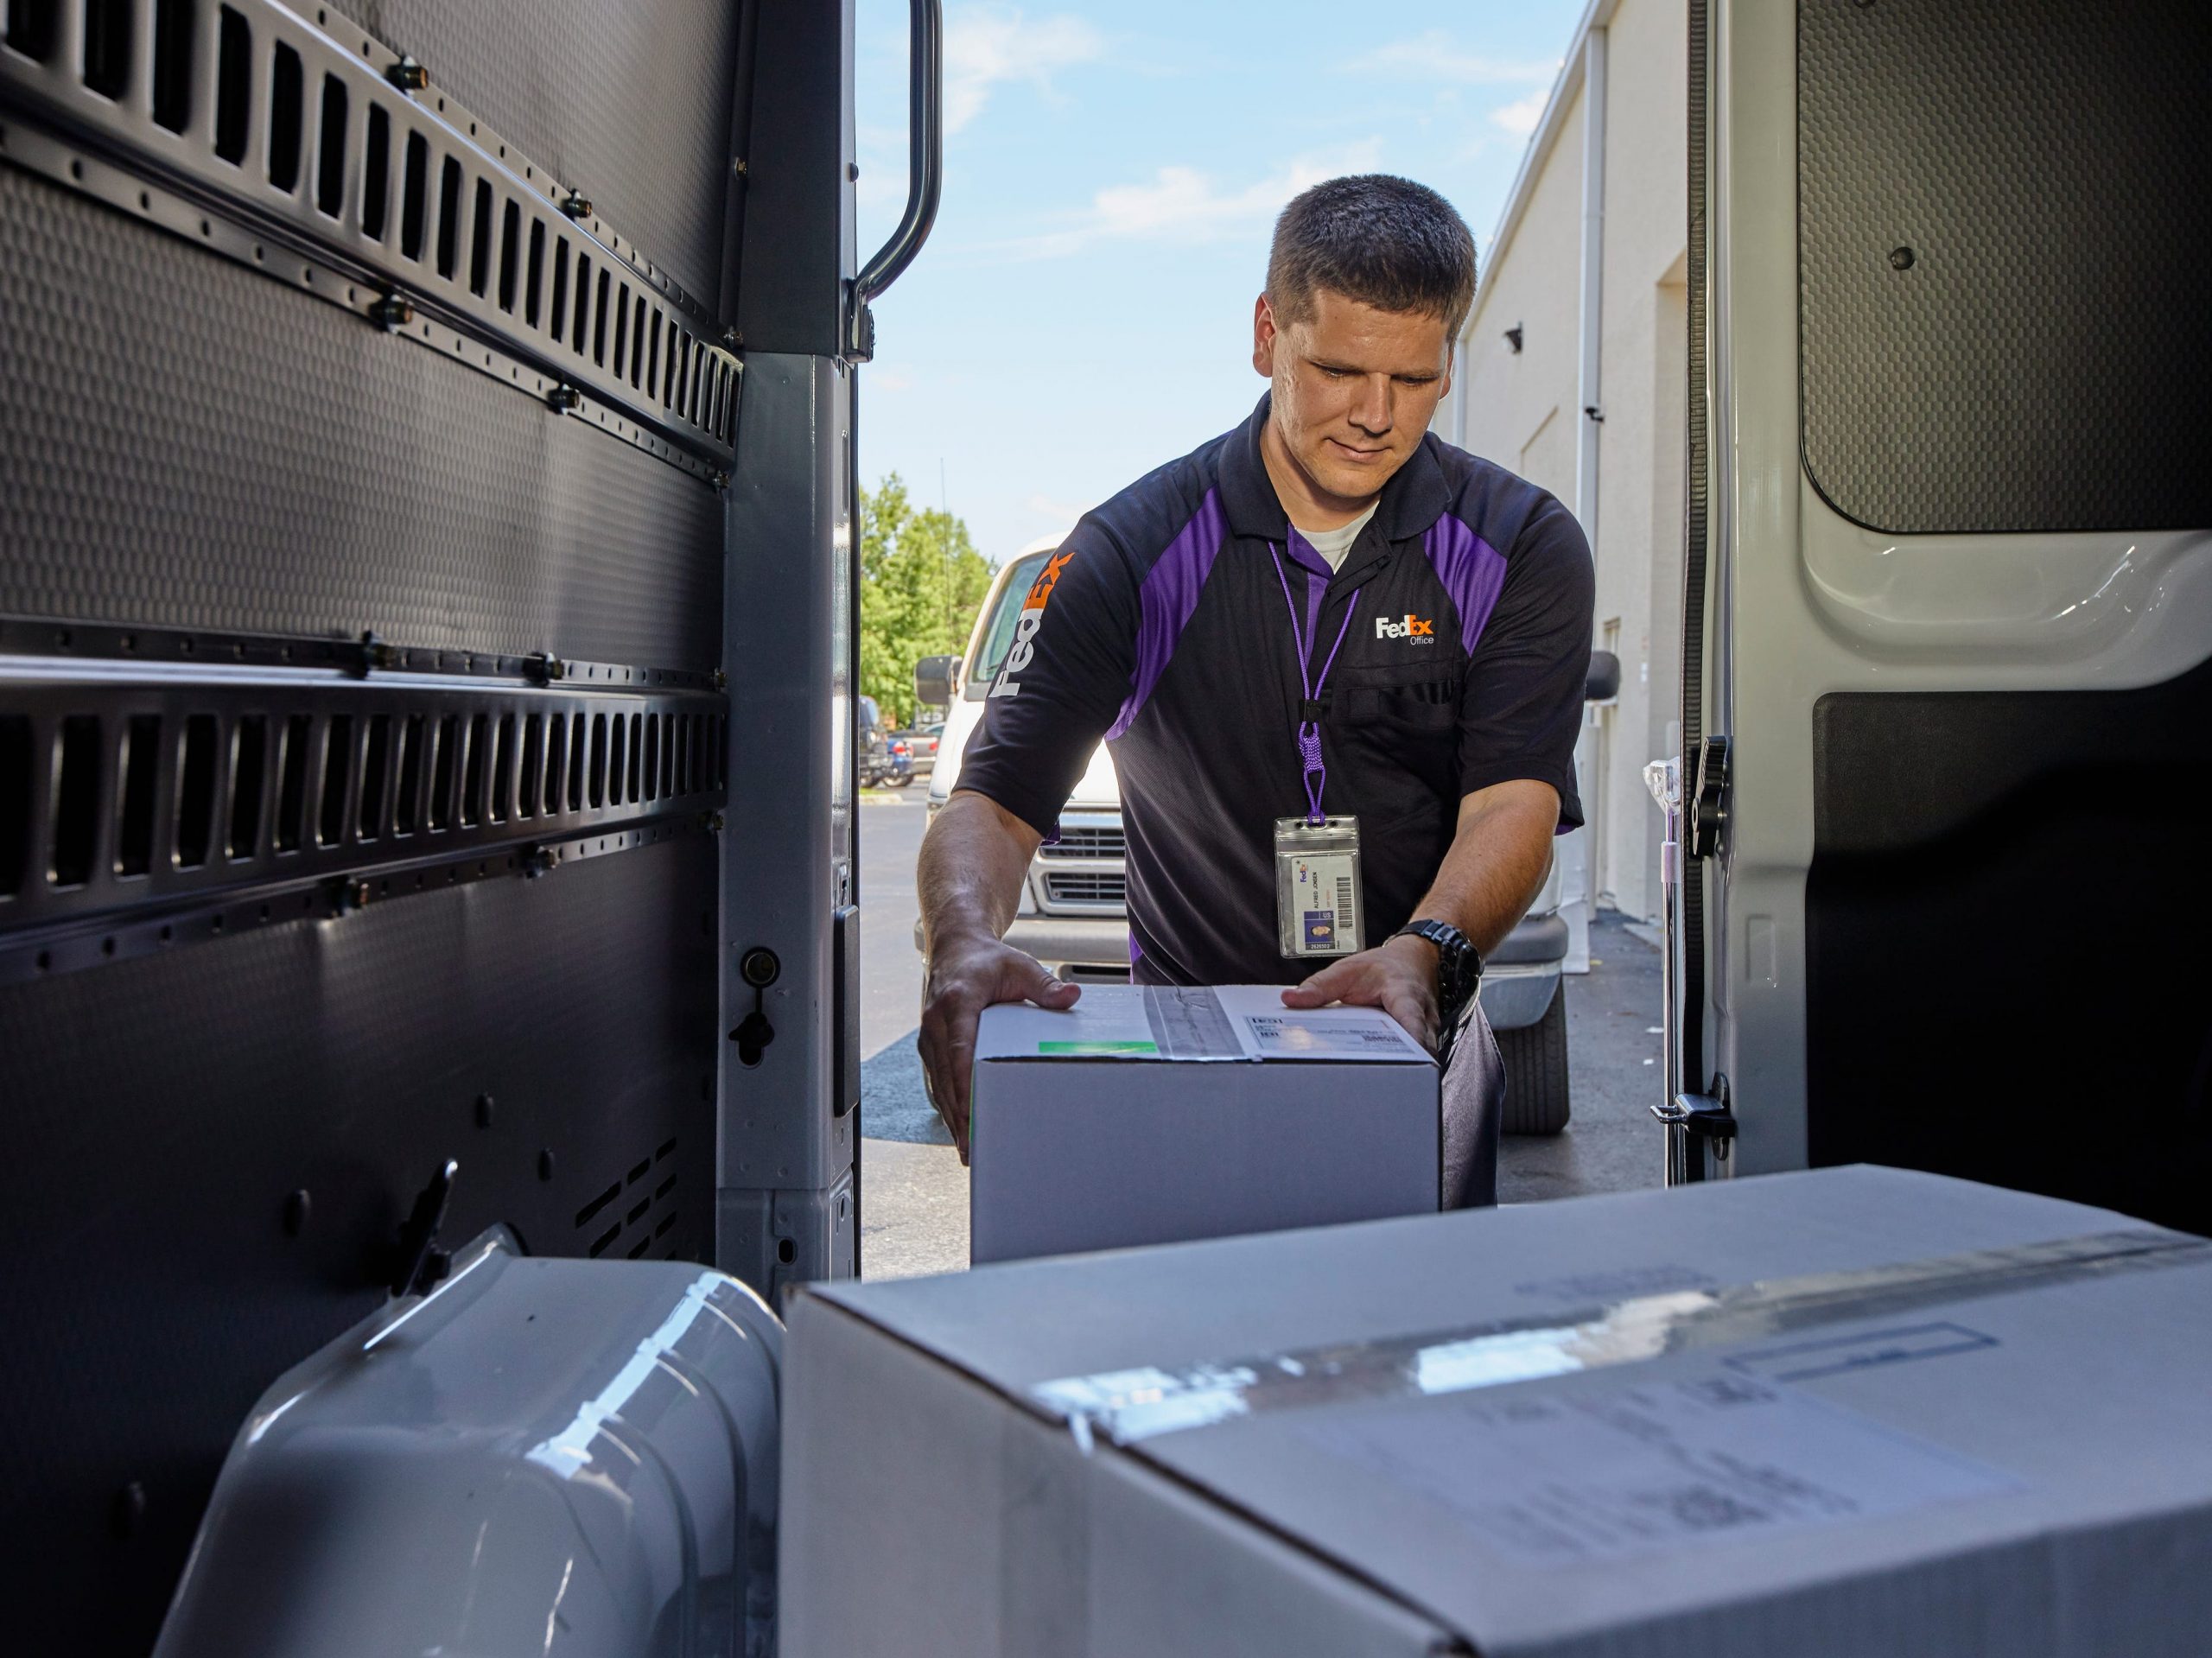 A FedEx delivery person takes a box out of a truck.